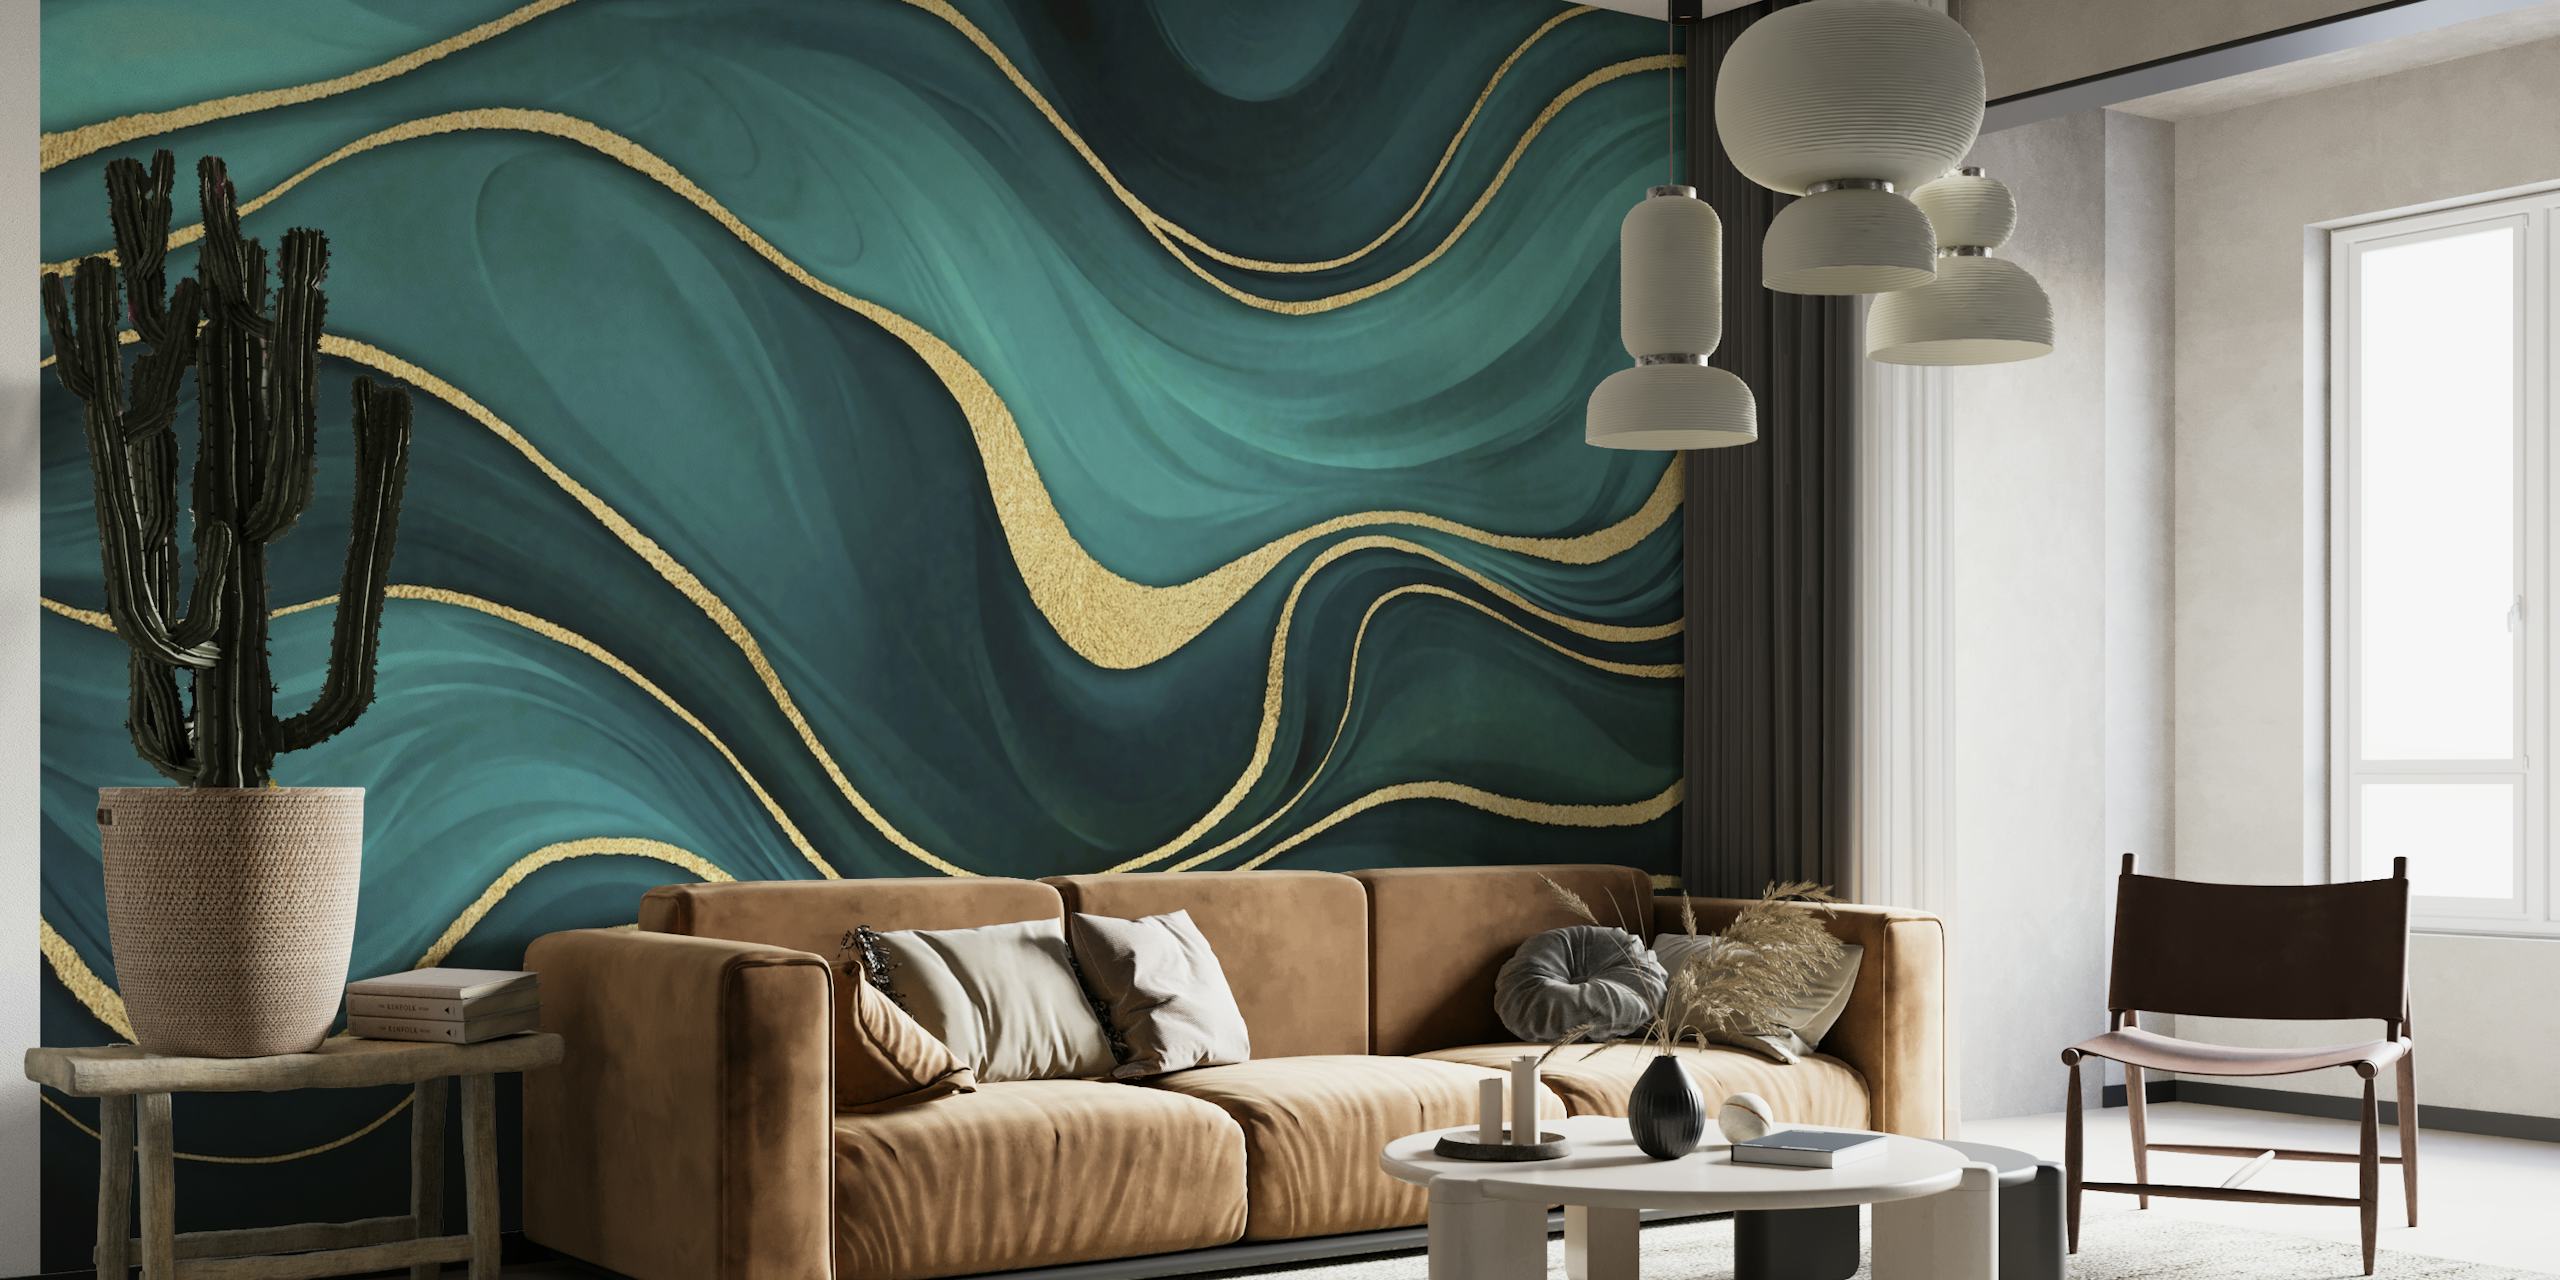 Luxury Marble Teal Turquoise With Gold behang